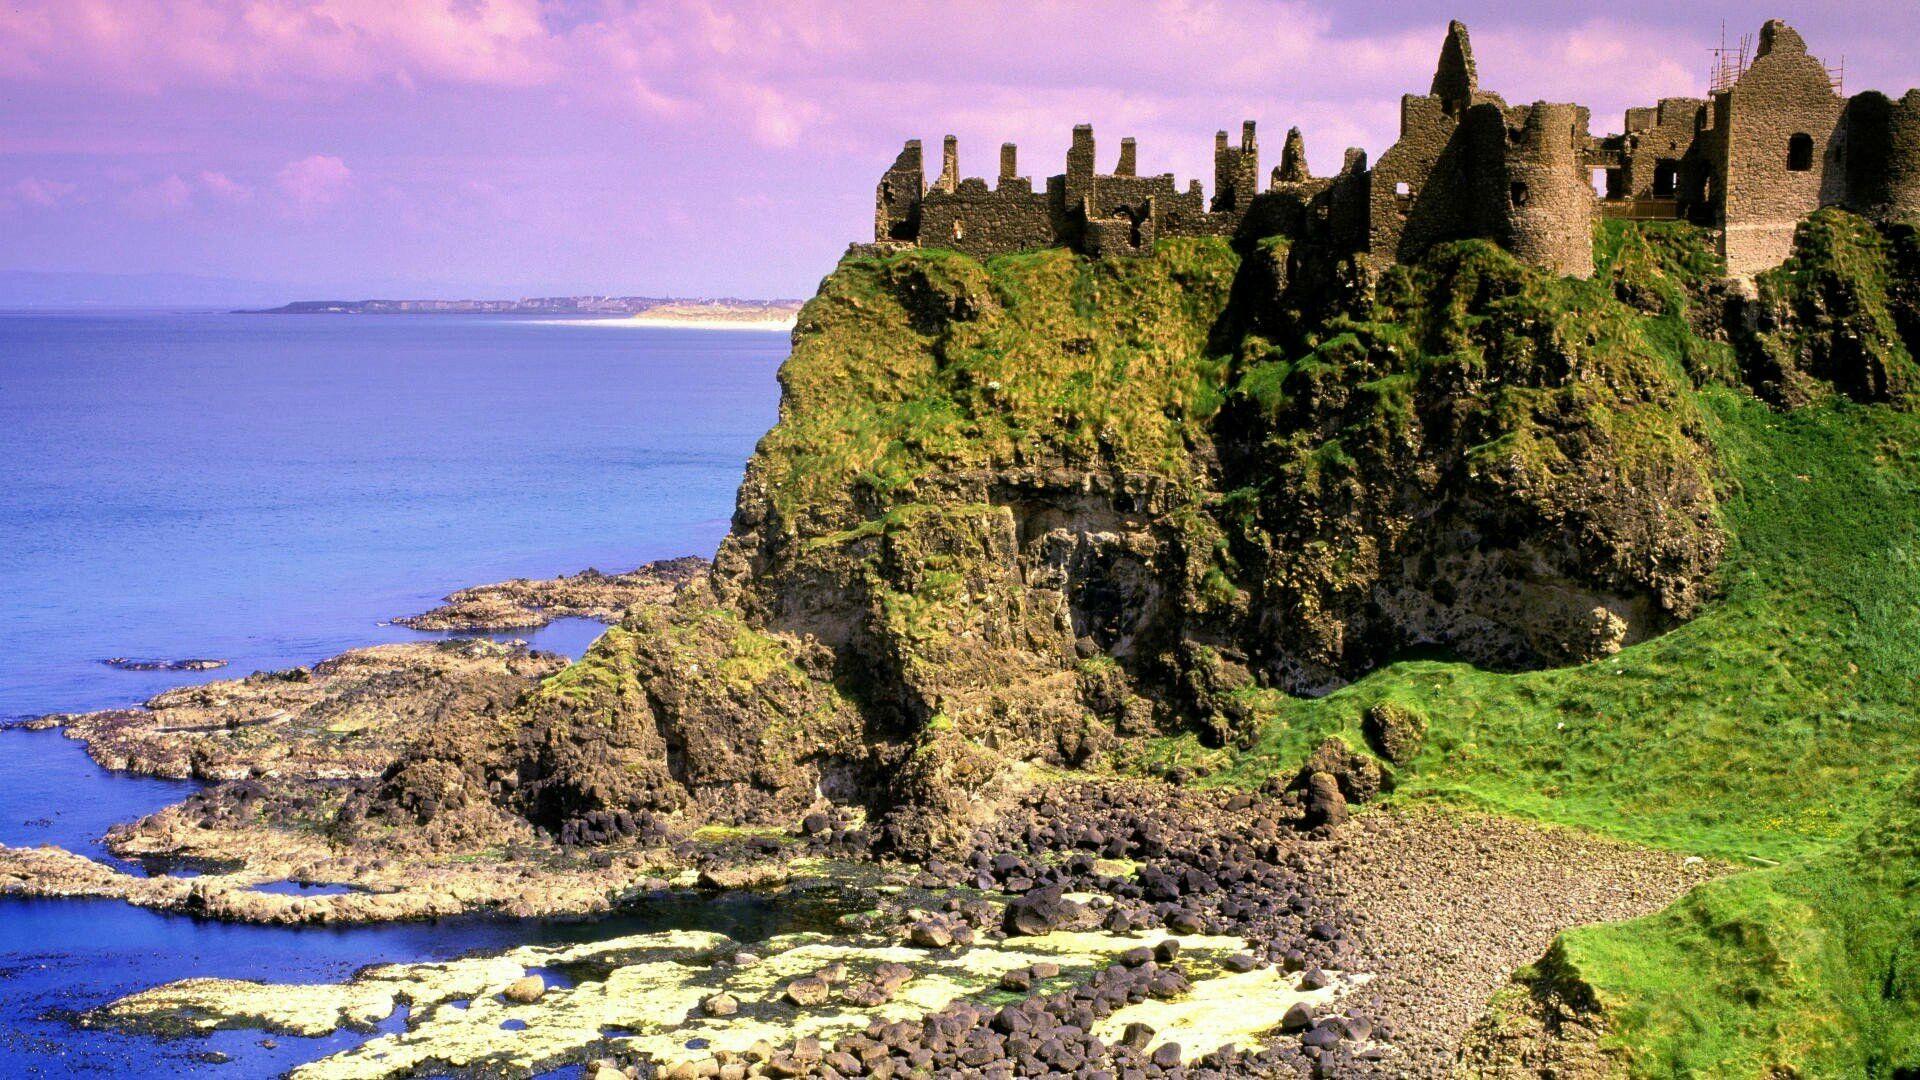 Dunluce Castle and the northern coastline, Co Antrim, Northern